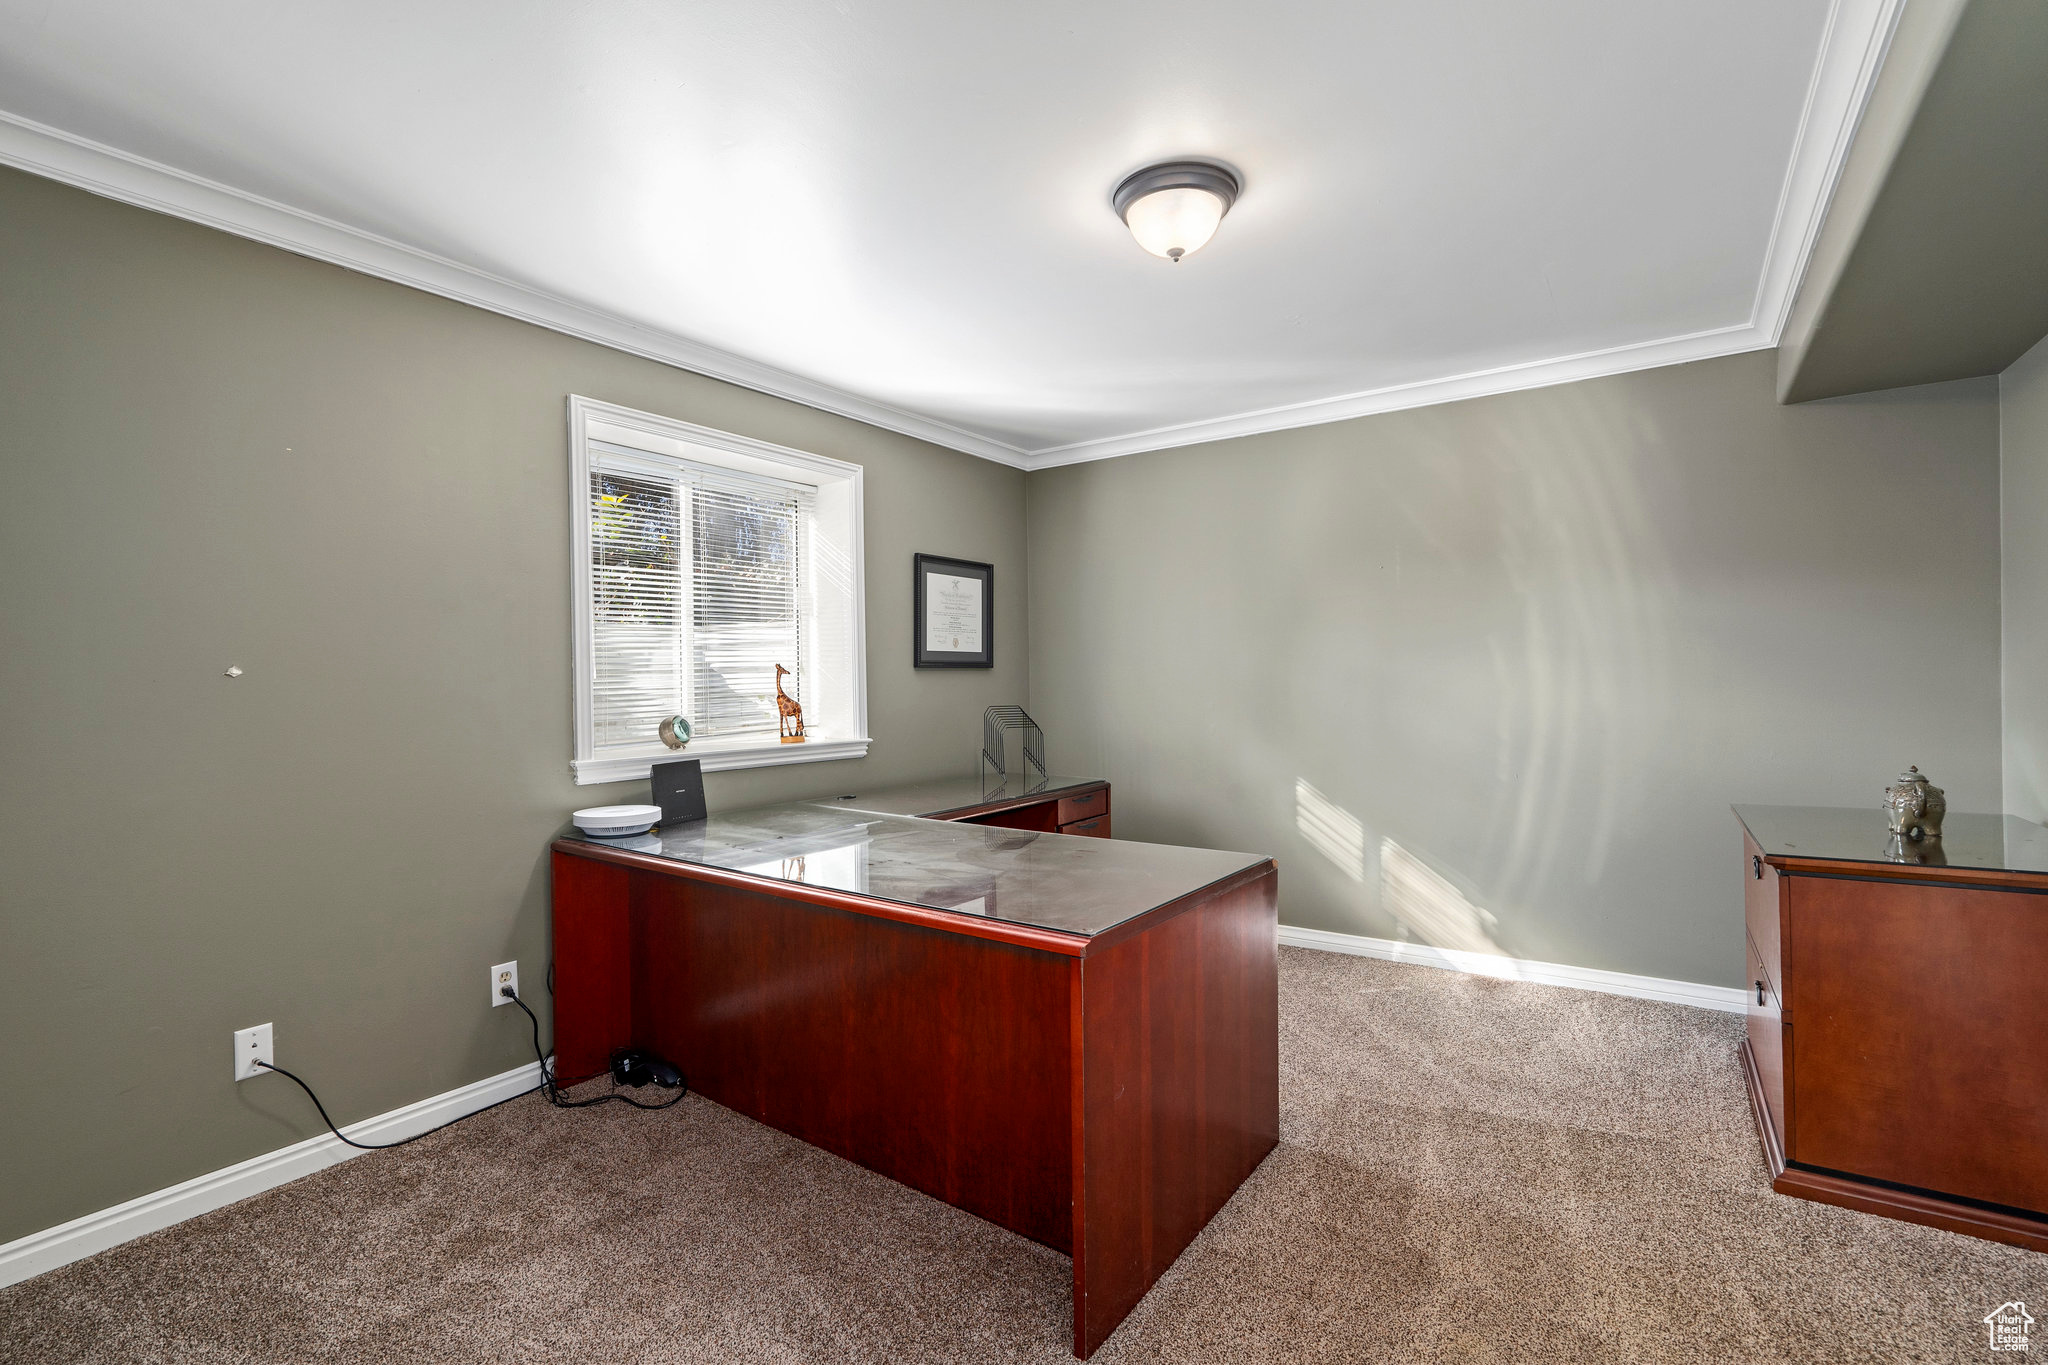 Carpeted office space featuring ornamental molding. This room is also technically a second bedroom with it's own closet just off the workout area.